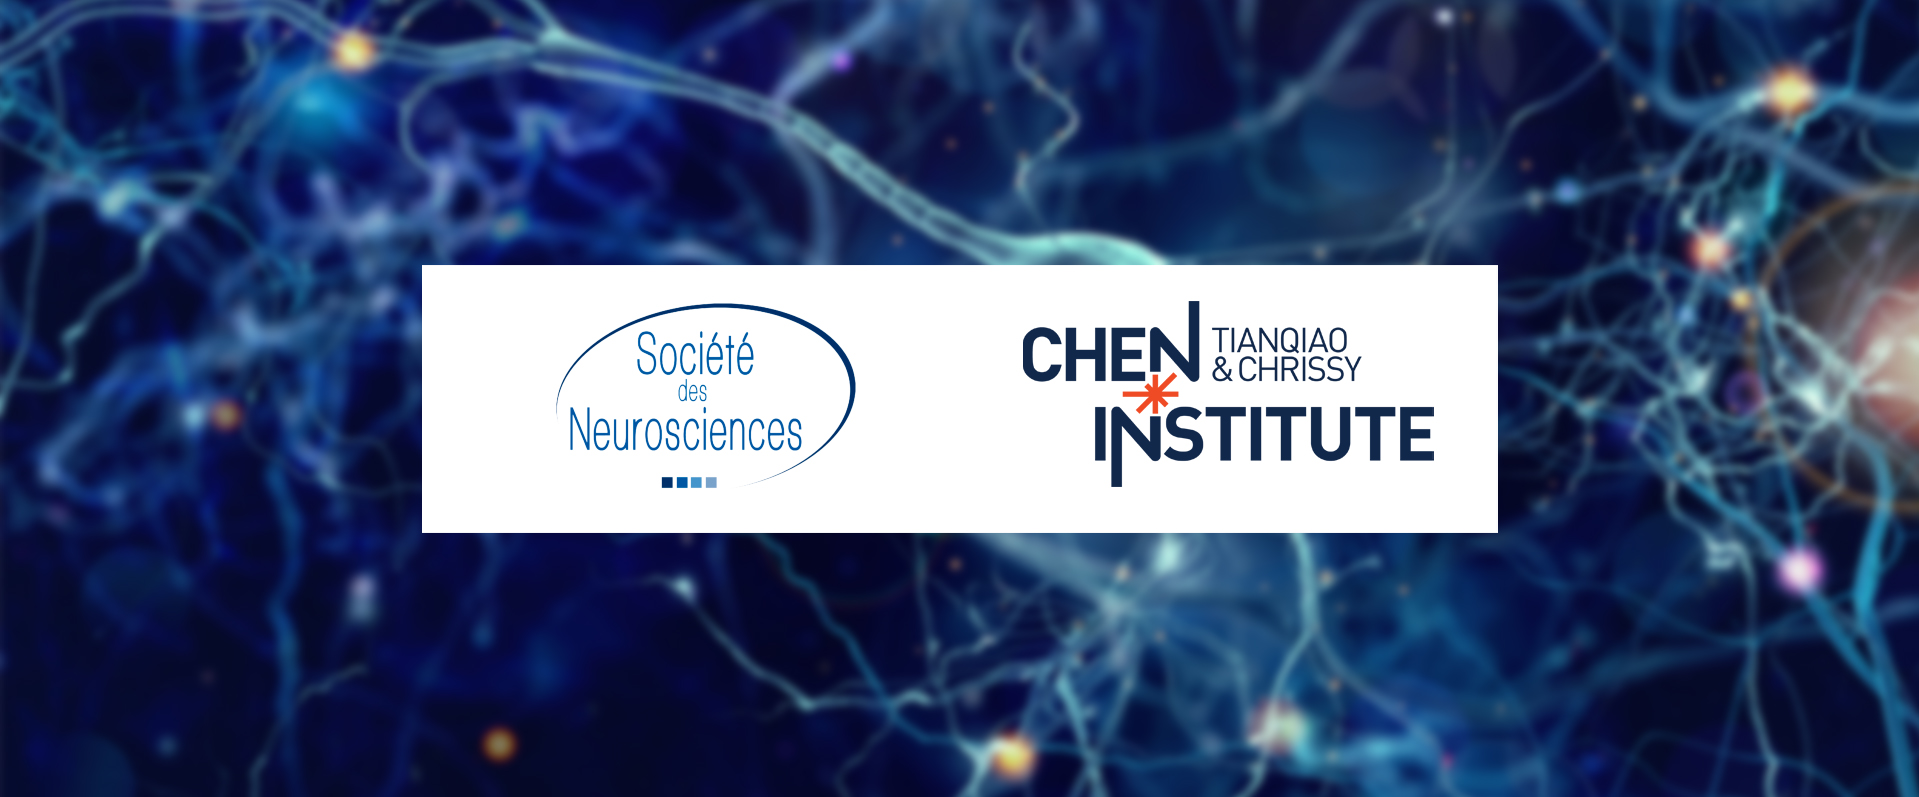 TCCI Forms New Partnership With The French Neuroscience Society